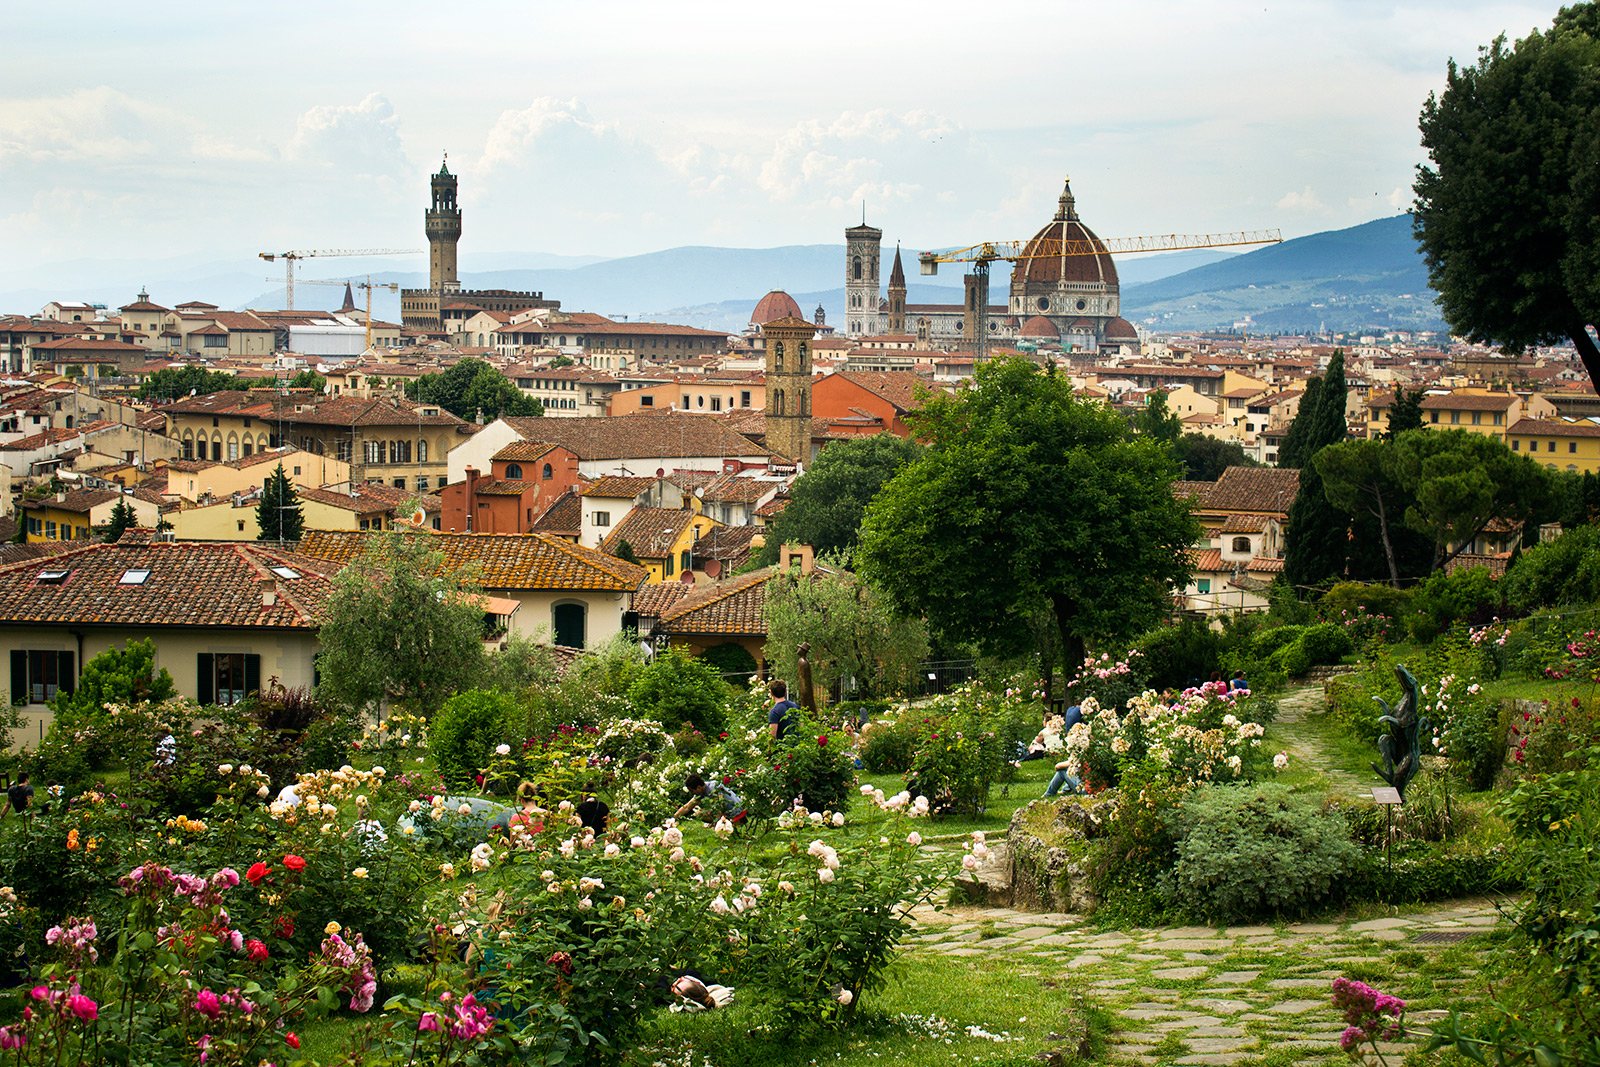 How to walk on the terraces of Rose Garden in Florence